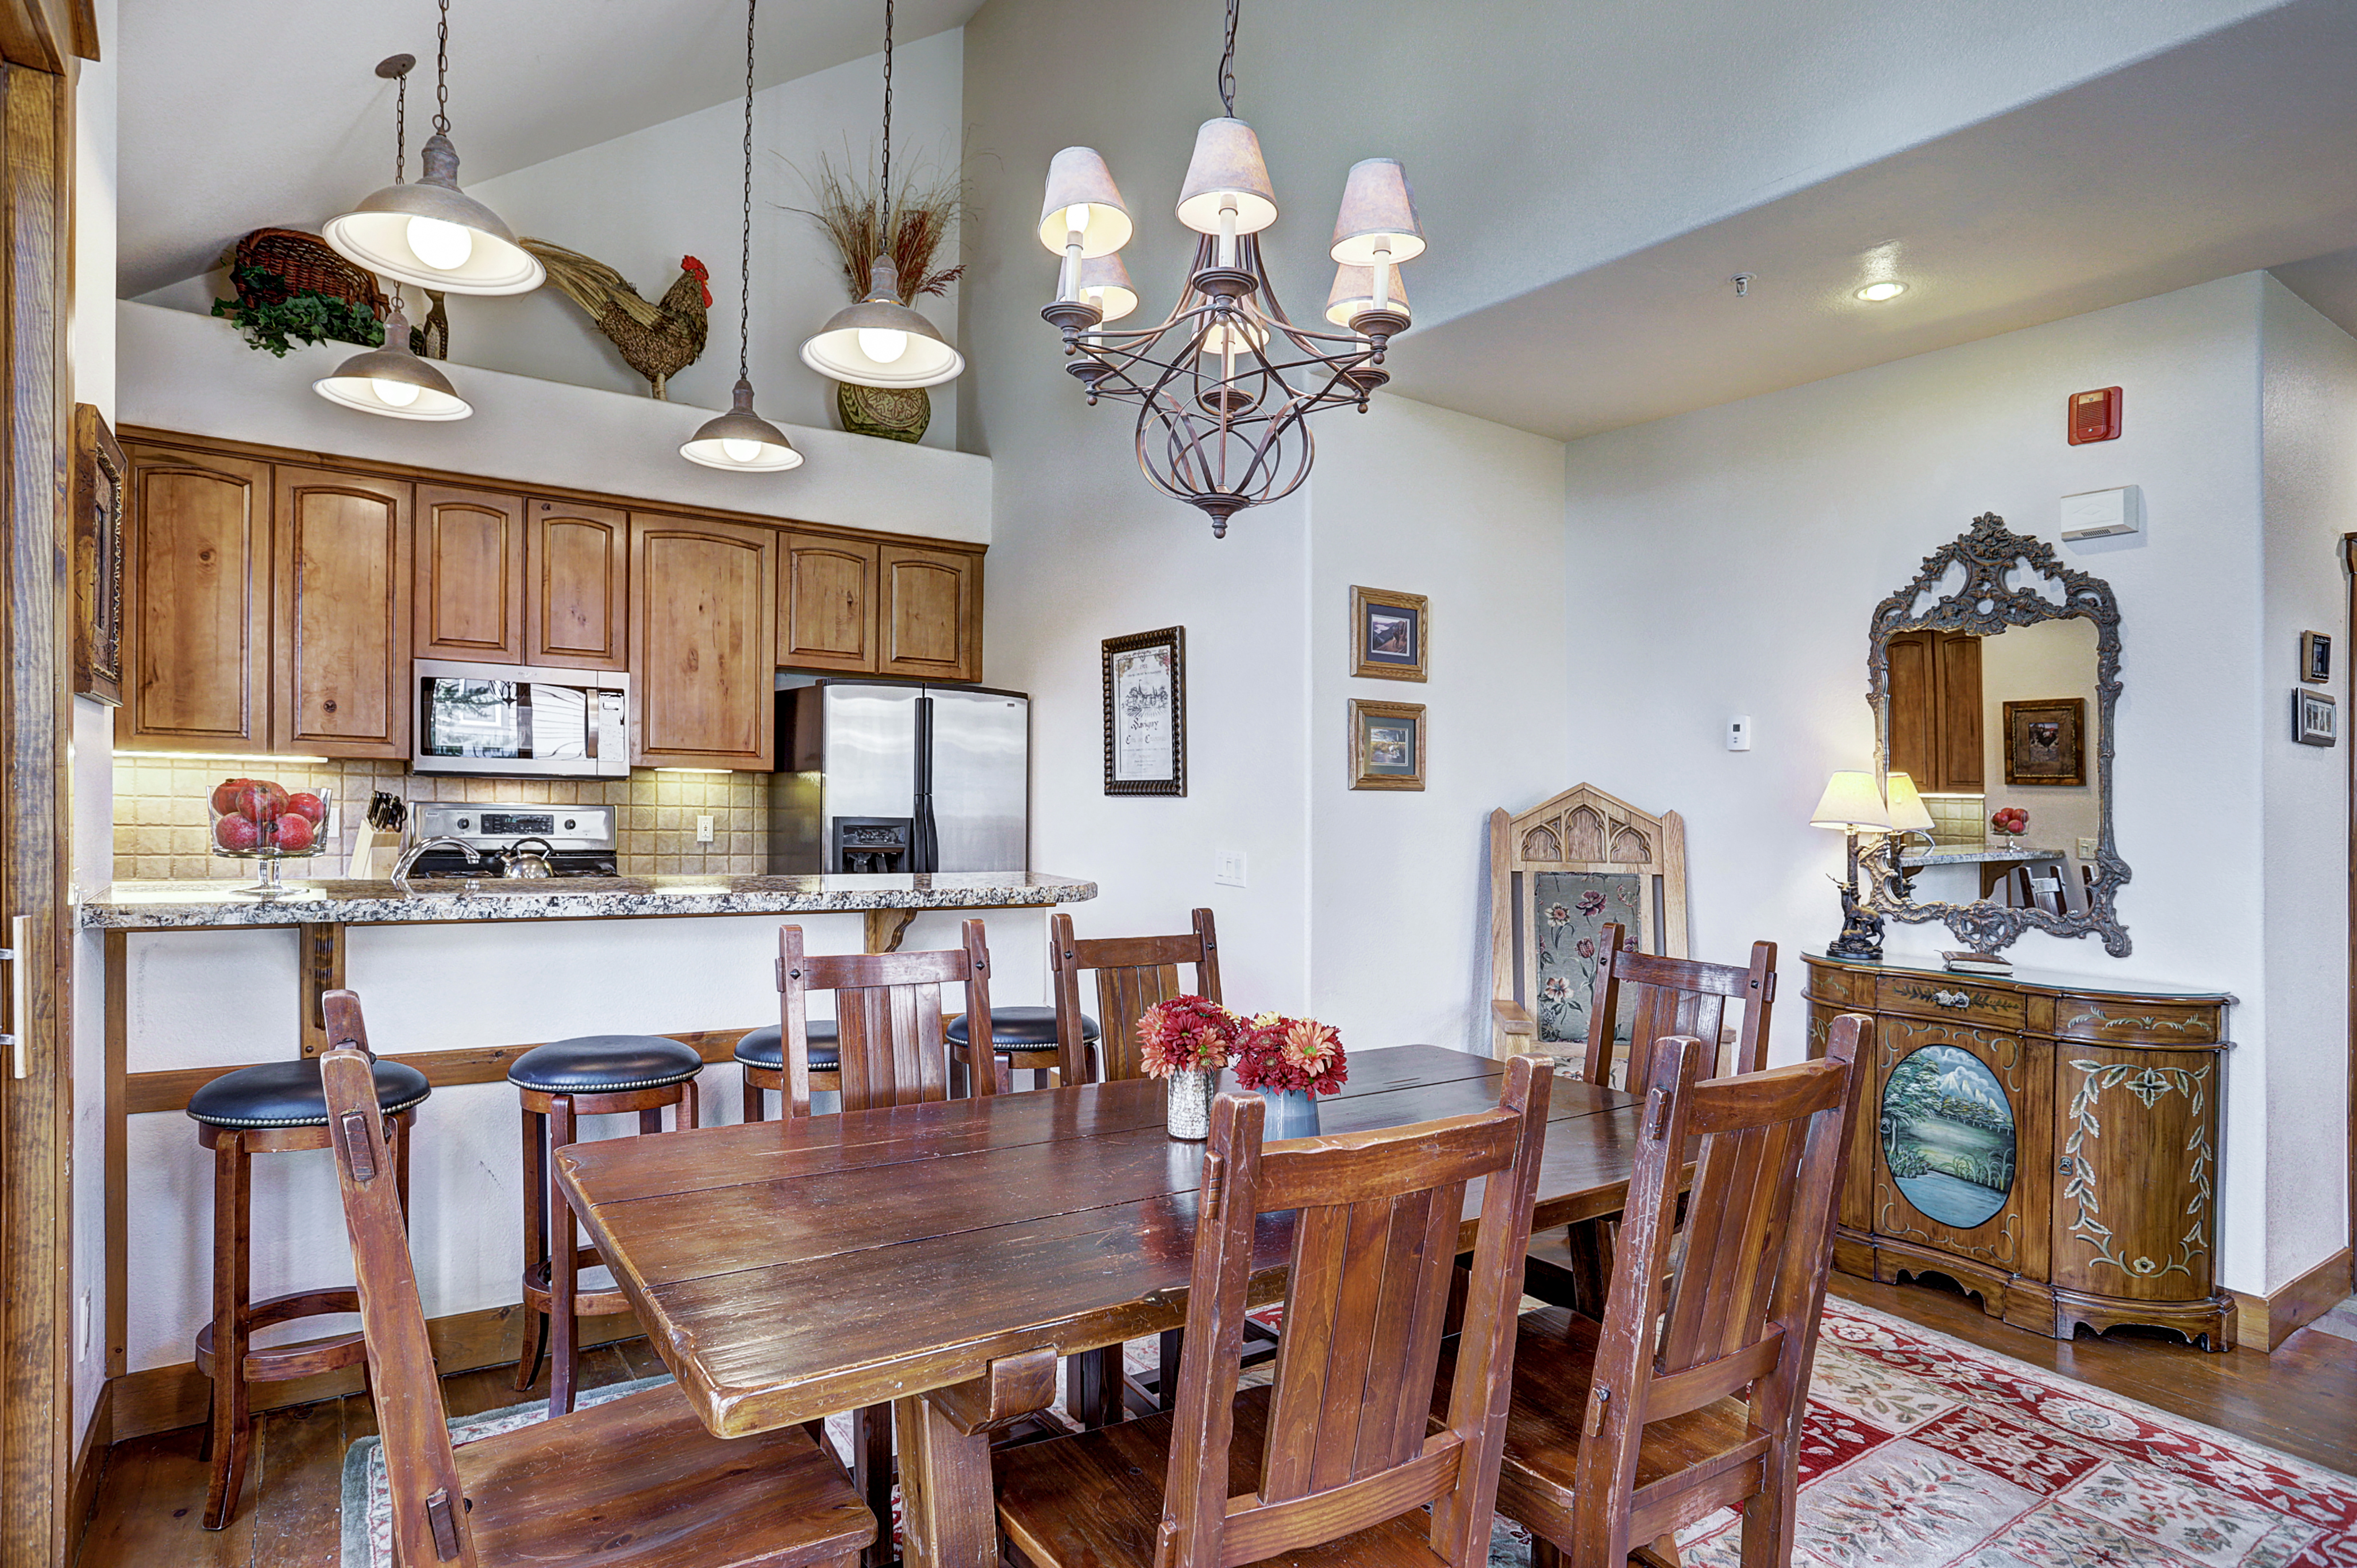 Seat 6 at this dining table with 4 extra spaces at the kitchen island - Amber Sky Breckenridge Vacation Rental